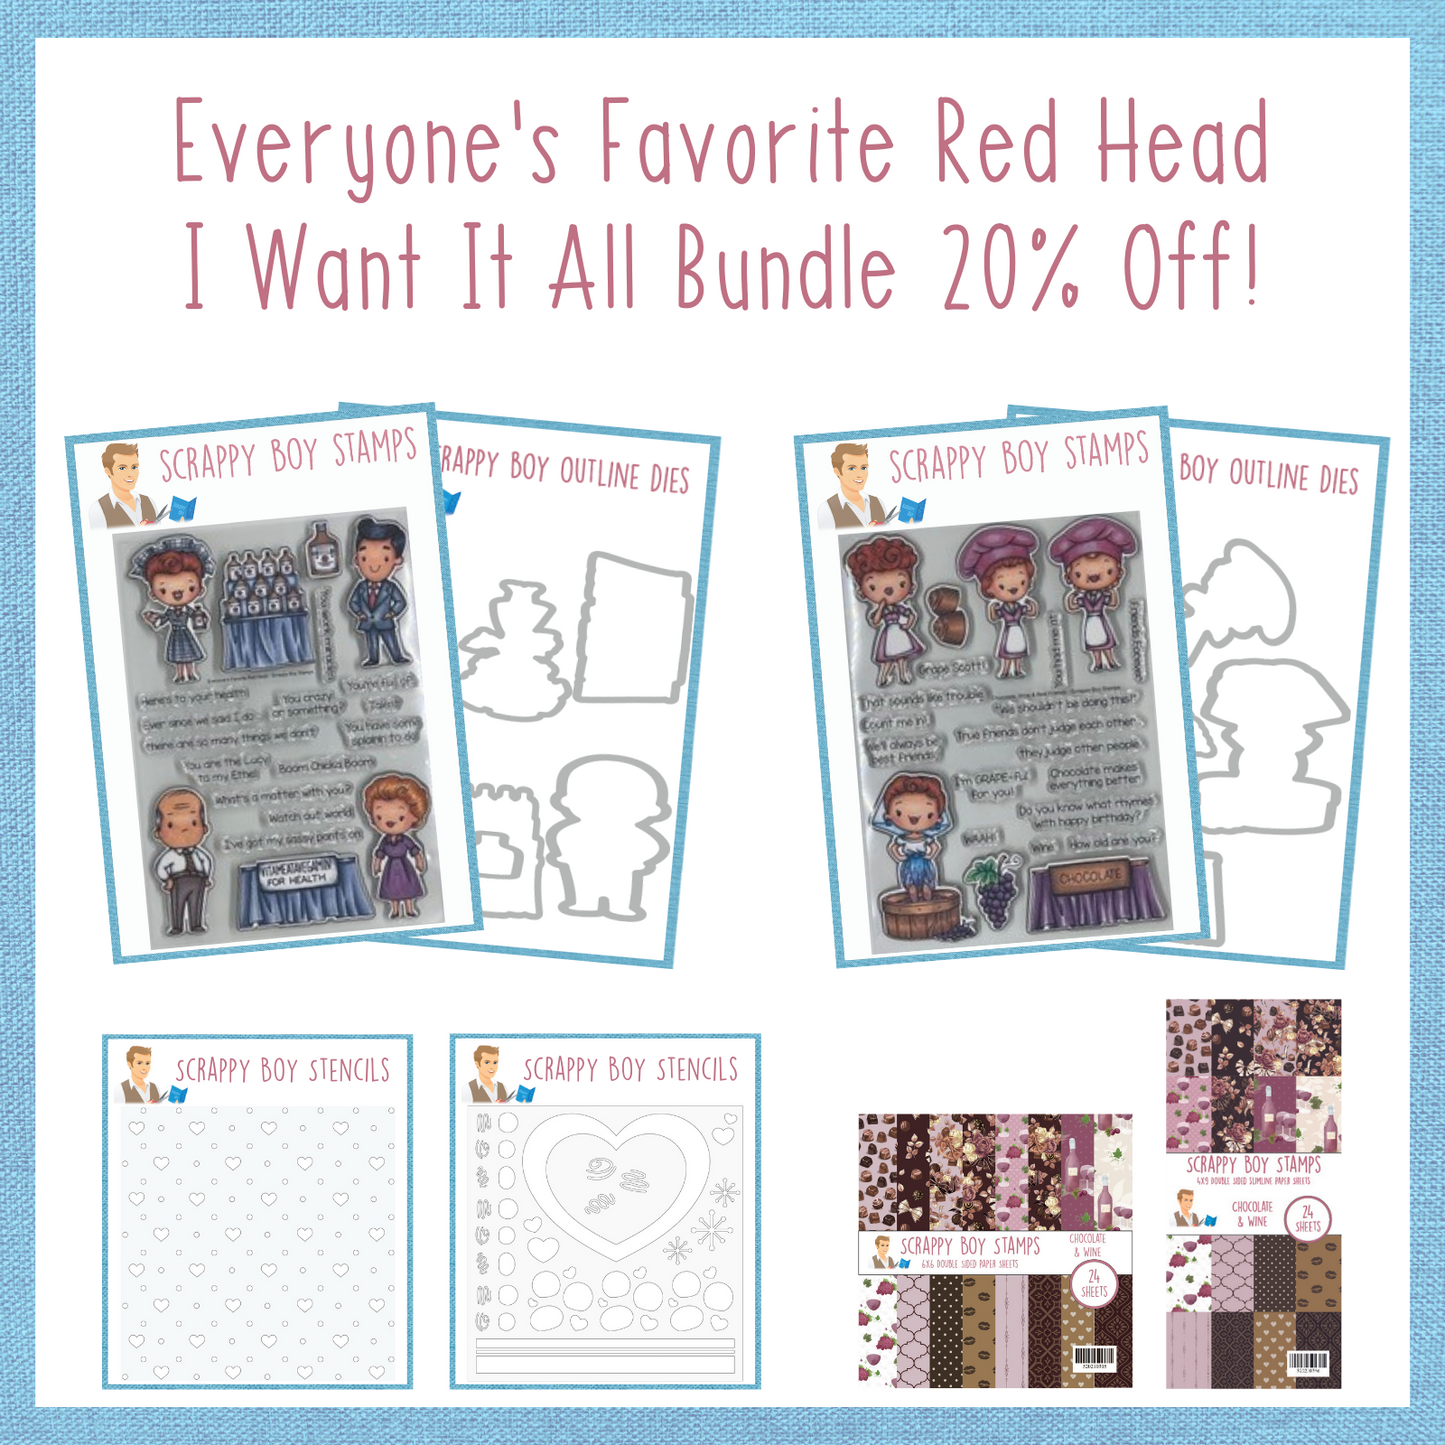 I Want It All Bundle - Everyone's Favorite Red Head scrappyboystamps